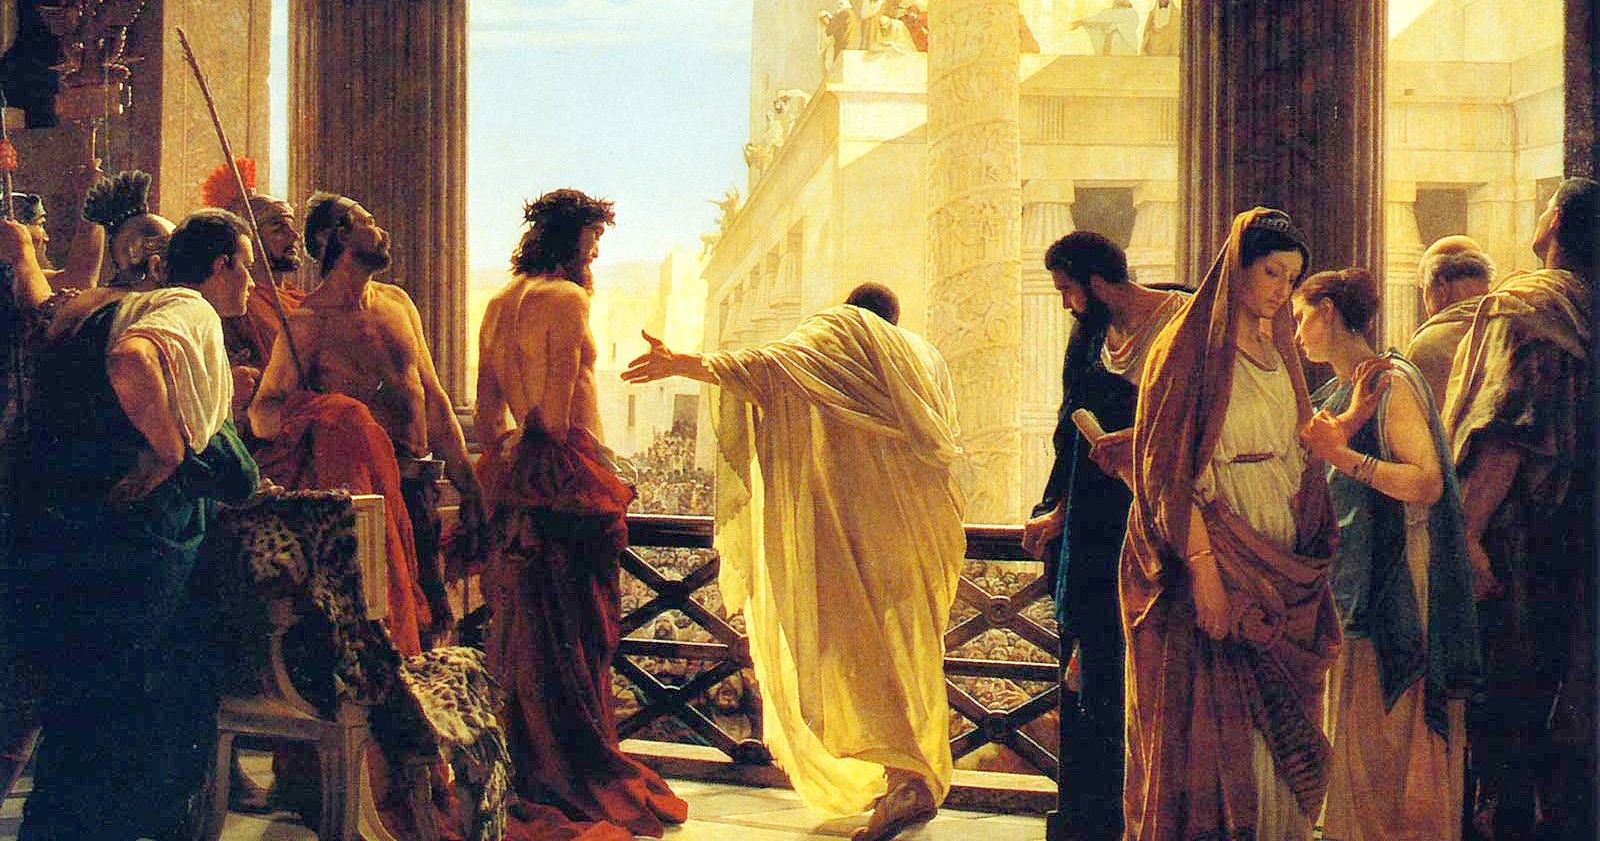 Painting showing Christ being presented to the Jews by Pontius Pilate.